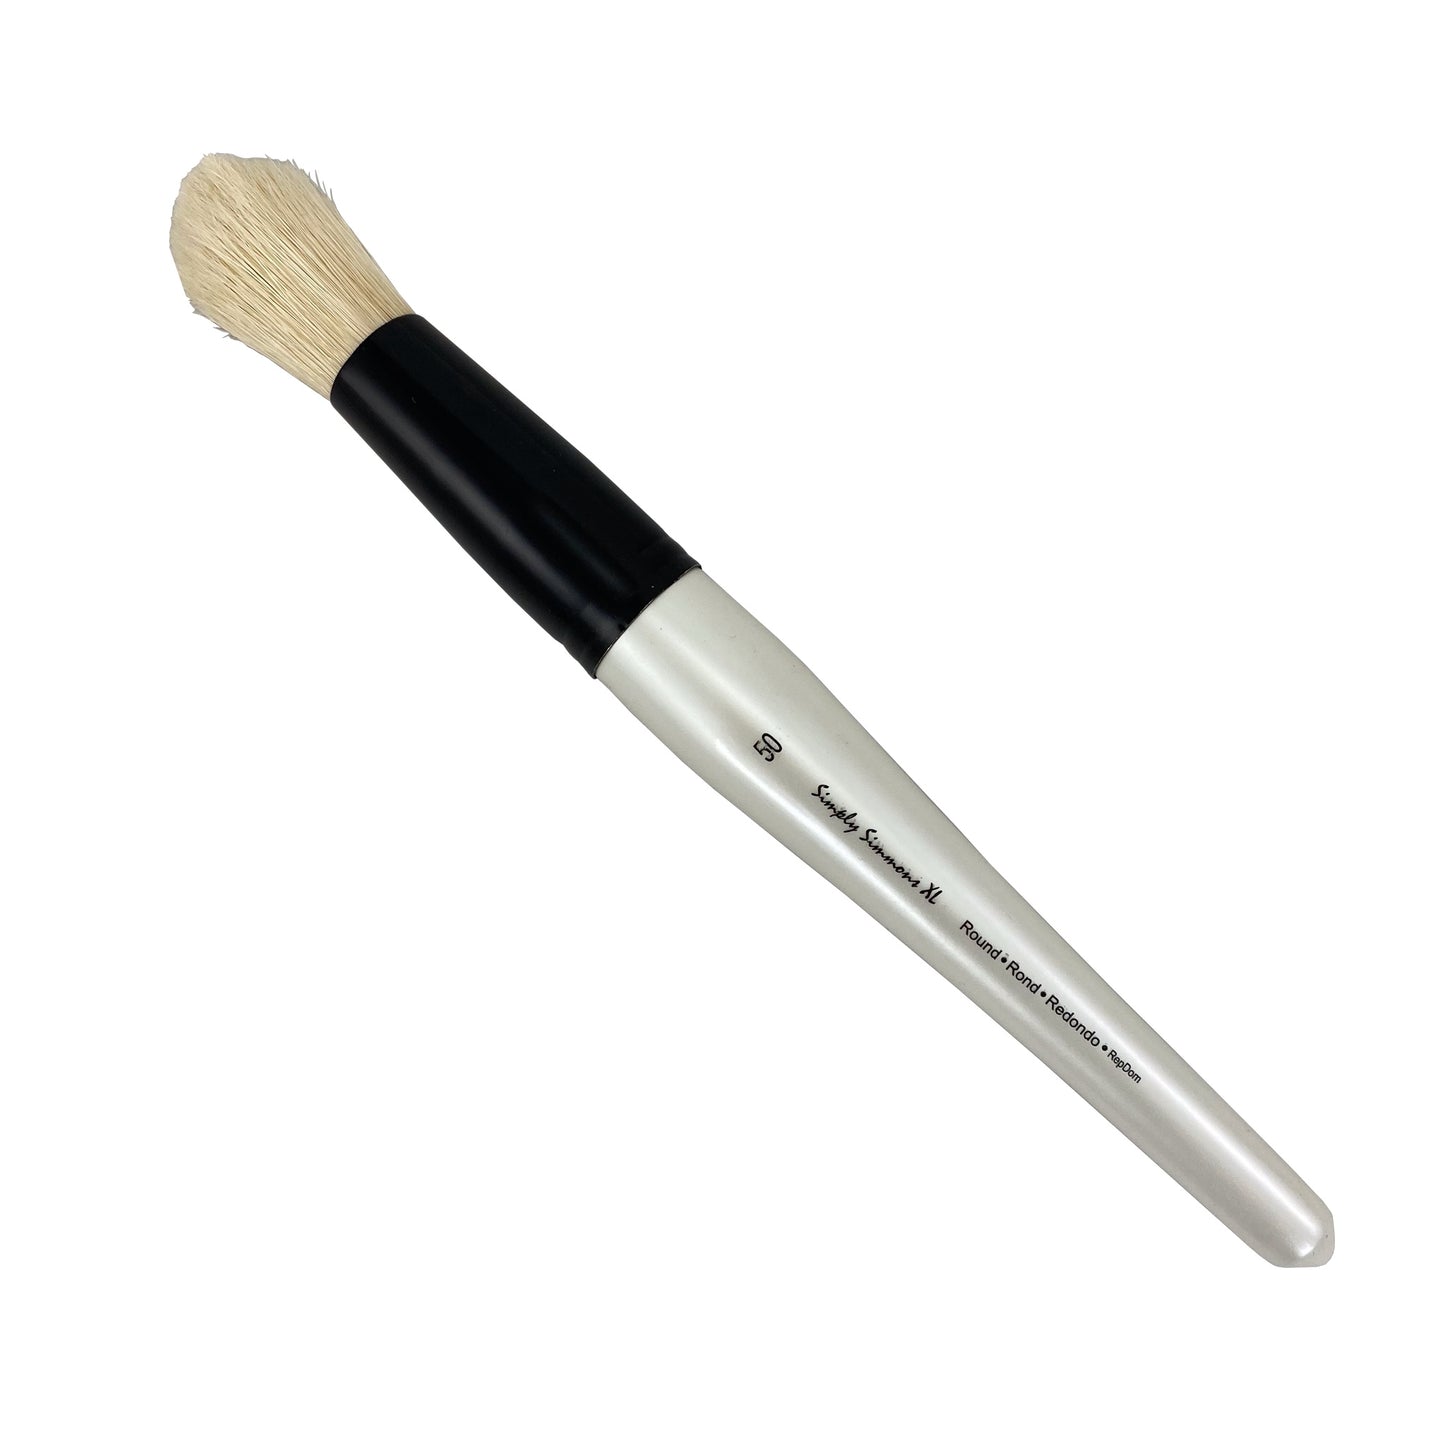 Simply Simmons XL Brushes - Round / #50 / Natural Bristle by Robert Simmons - K. A. Artist Shop